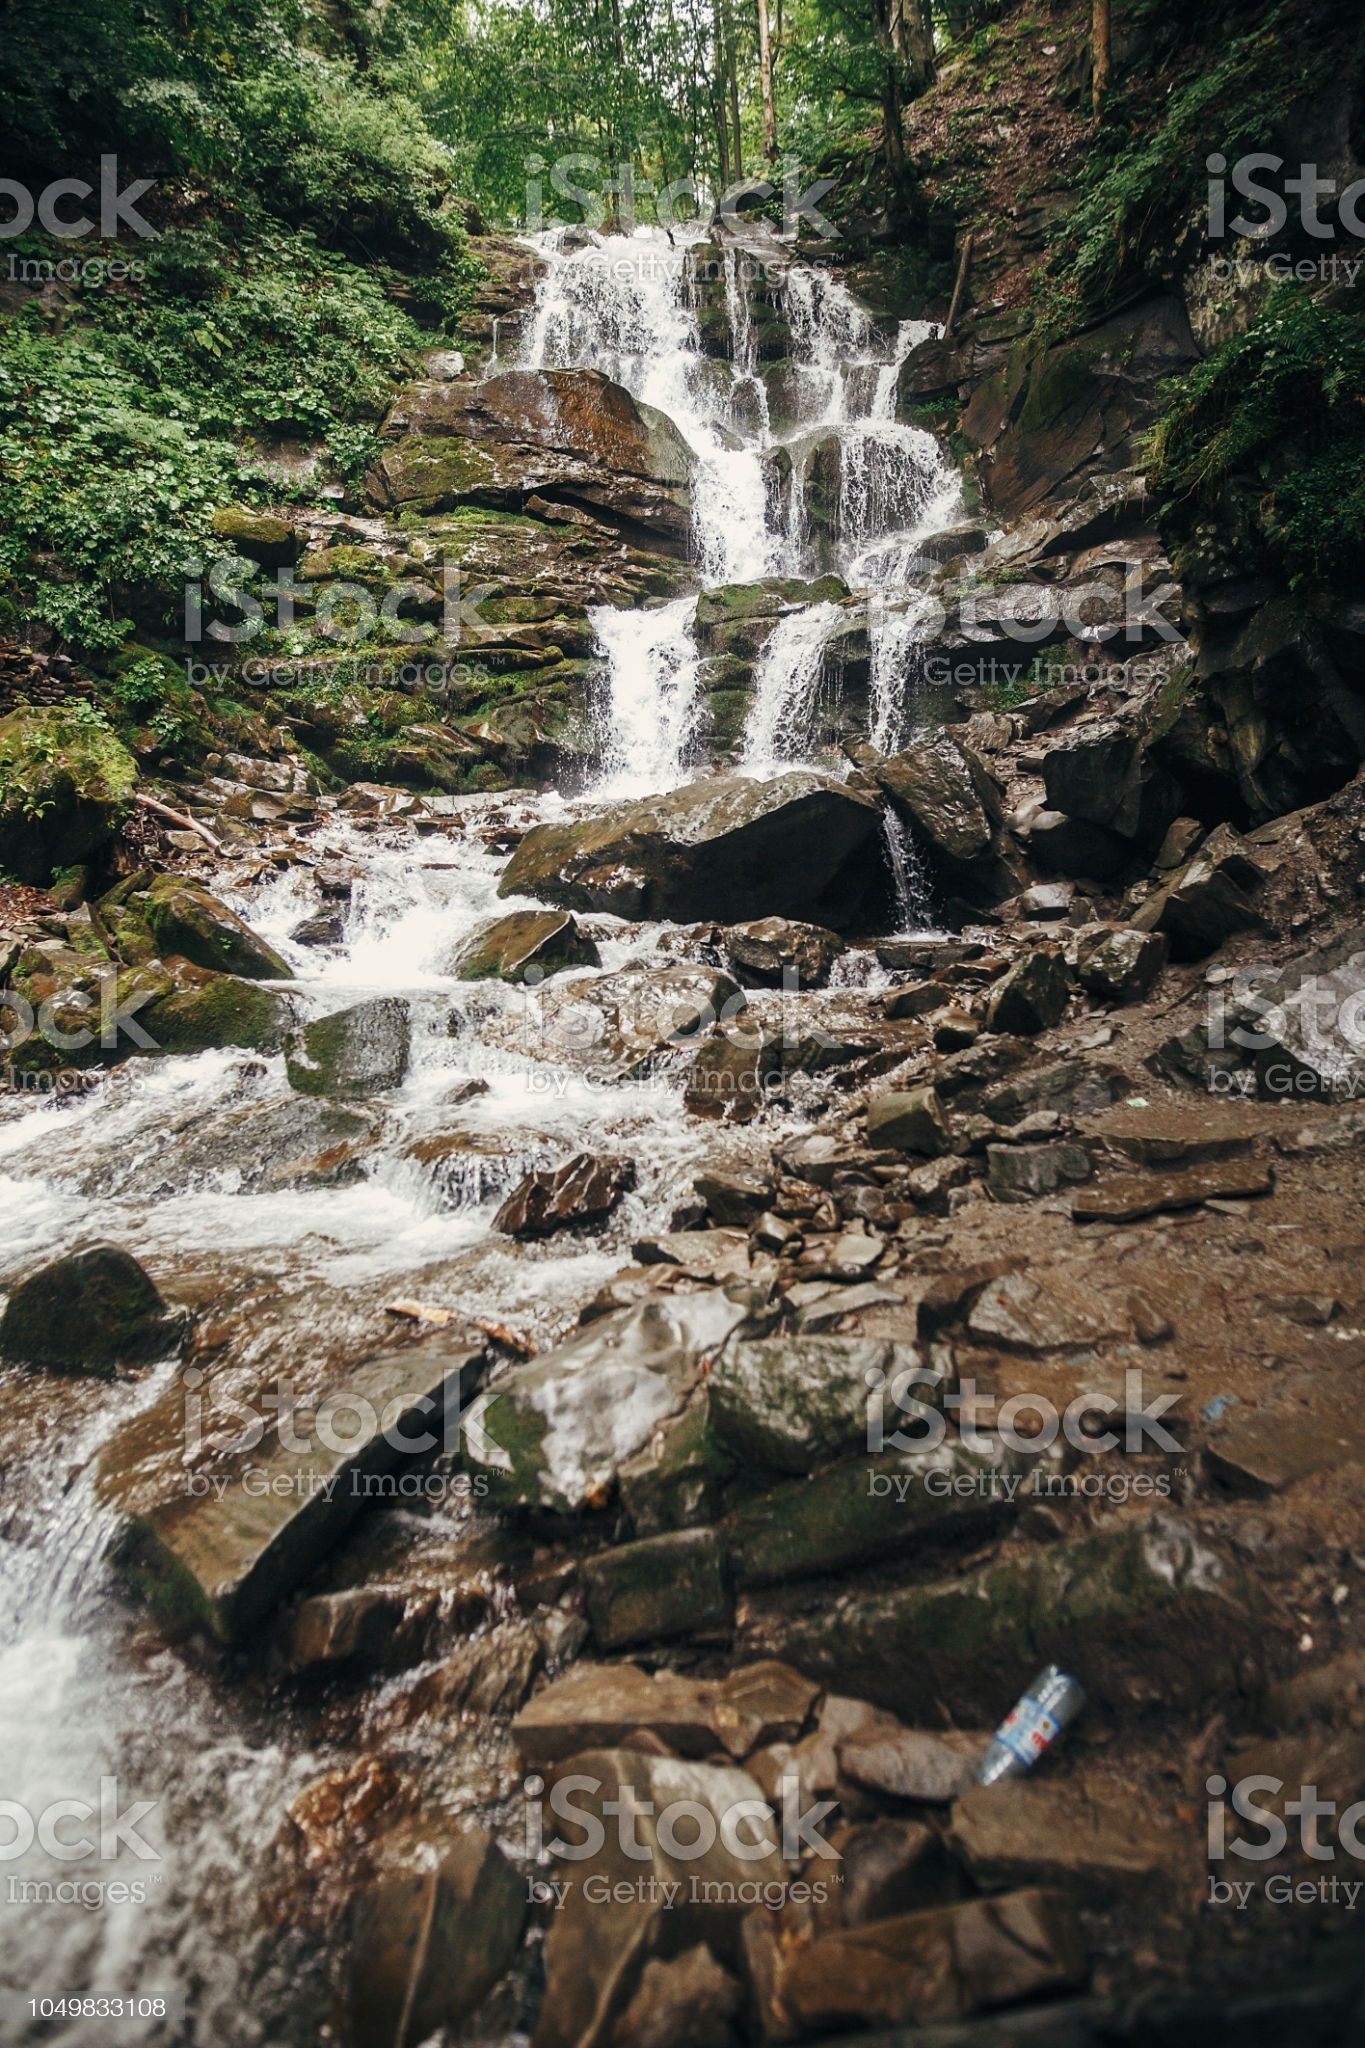 beautiful waterfall on river in forest in mountains. cascades river with water motion and rocks. beautiful scenery landscape of river in woods under summer sun light. vertical rainforest wallpaper